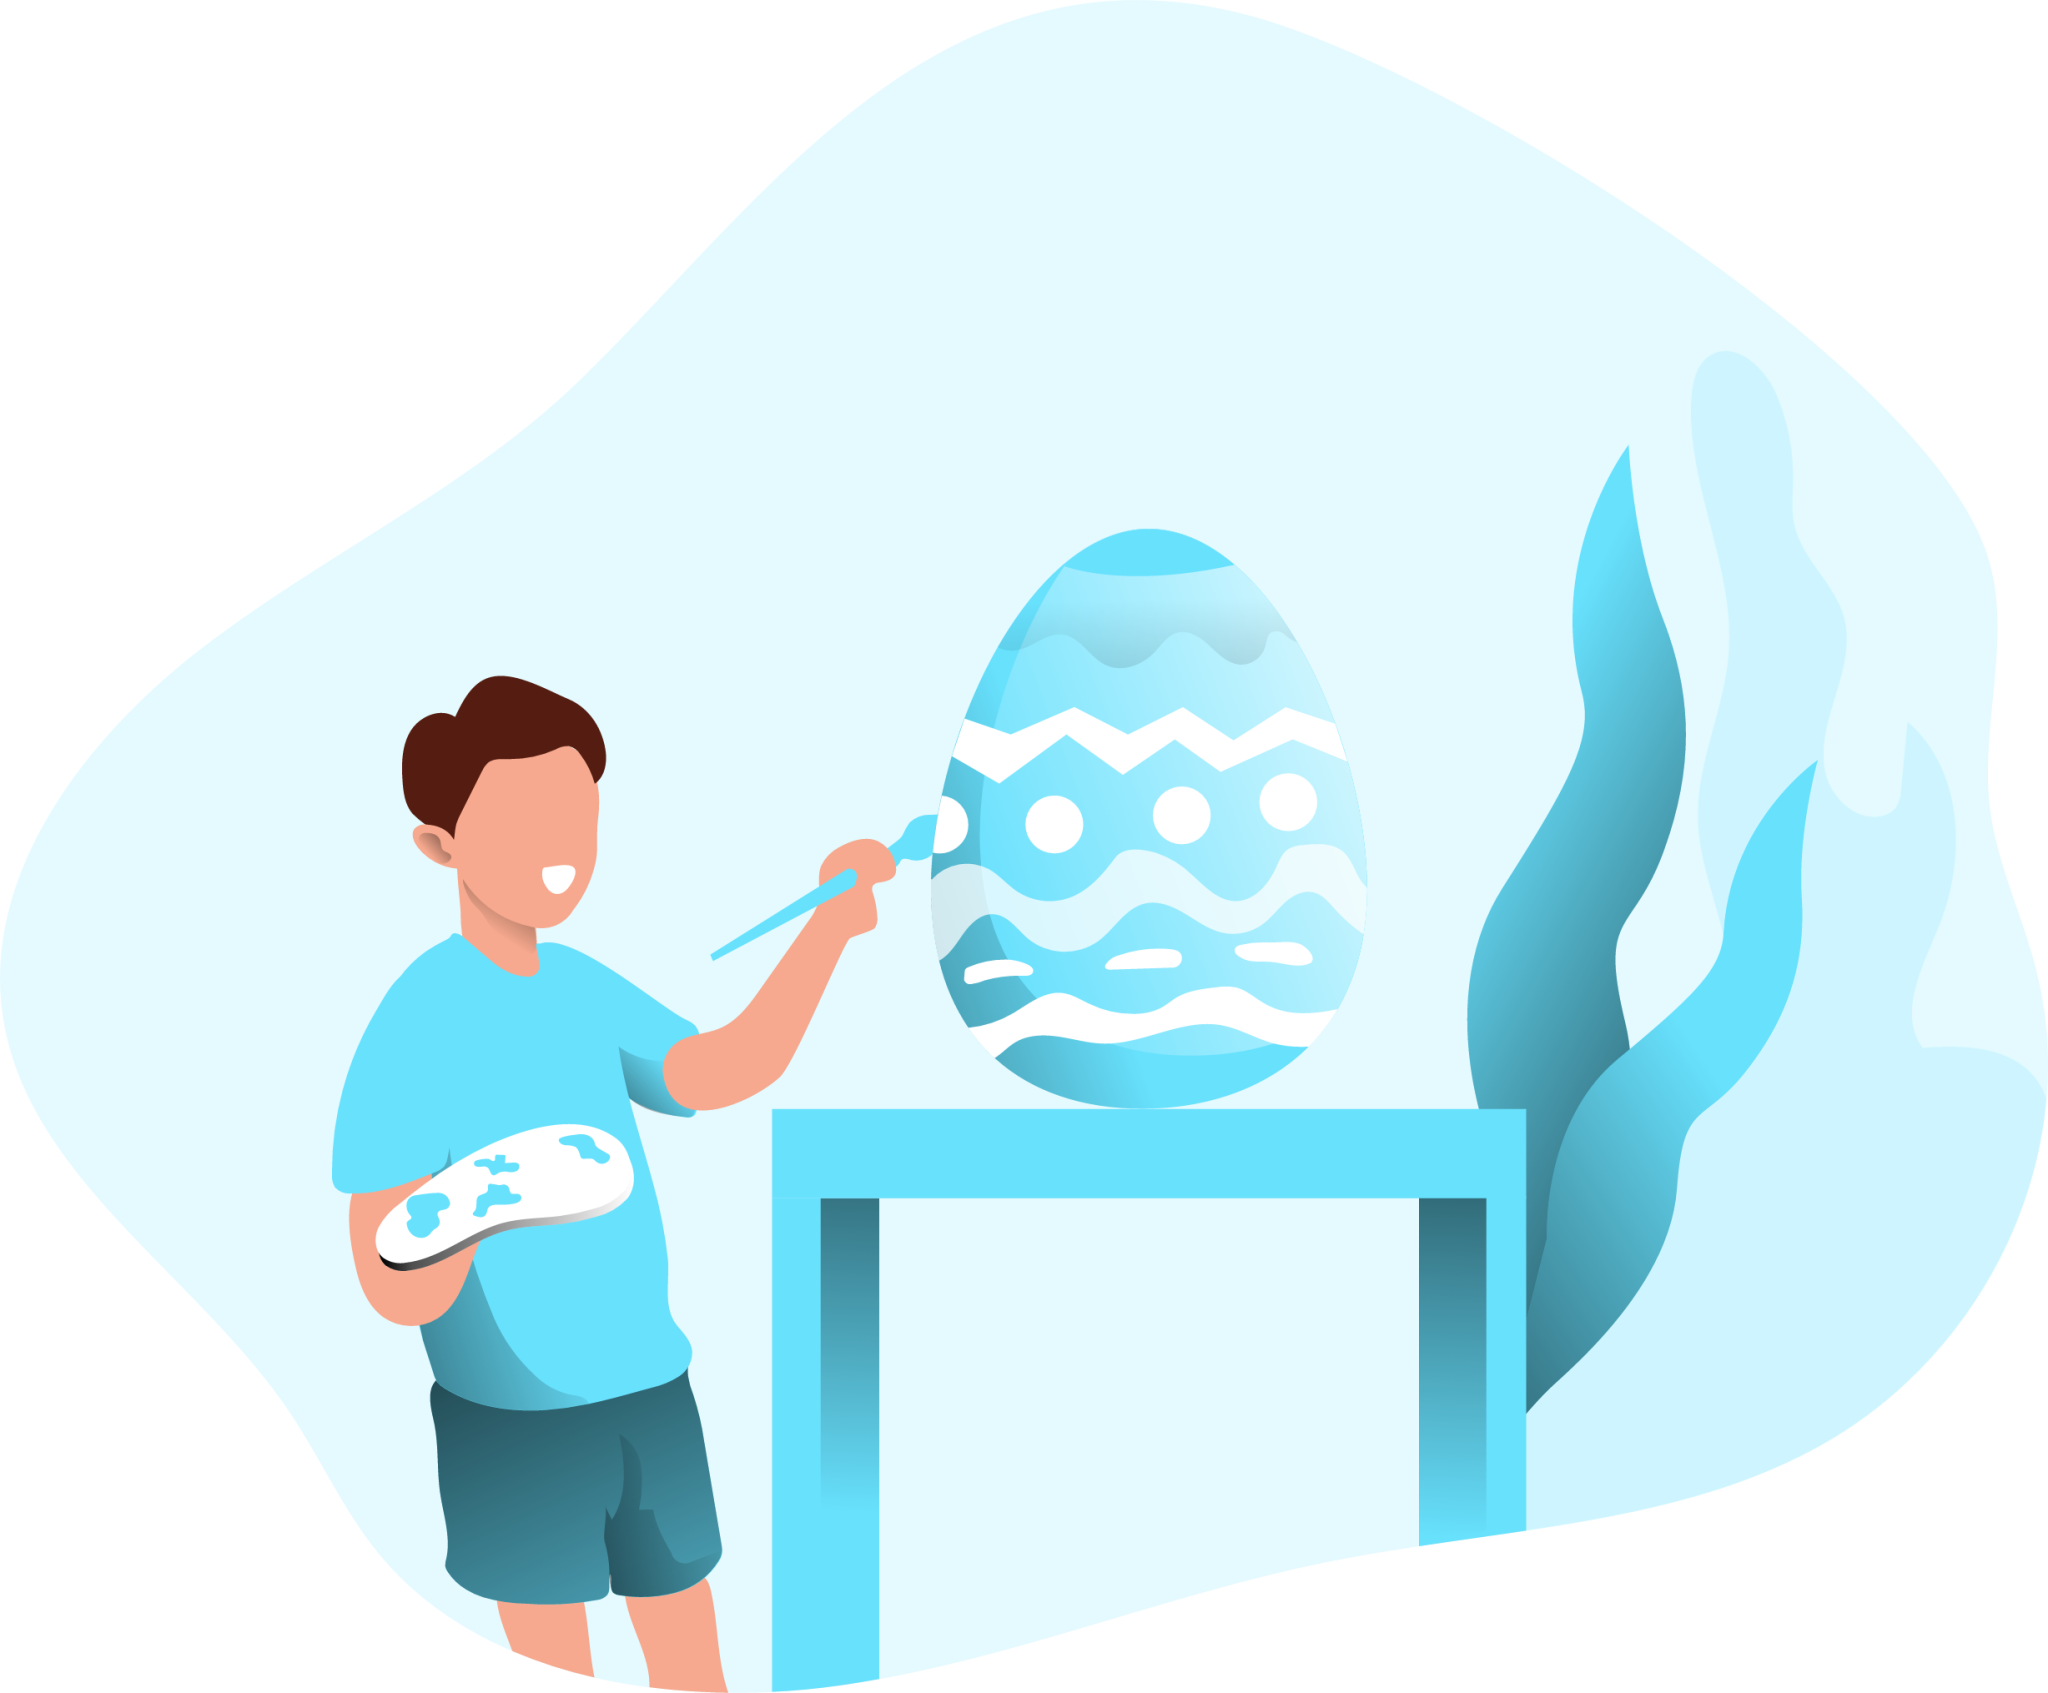 Painting an egg illustration